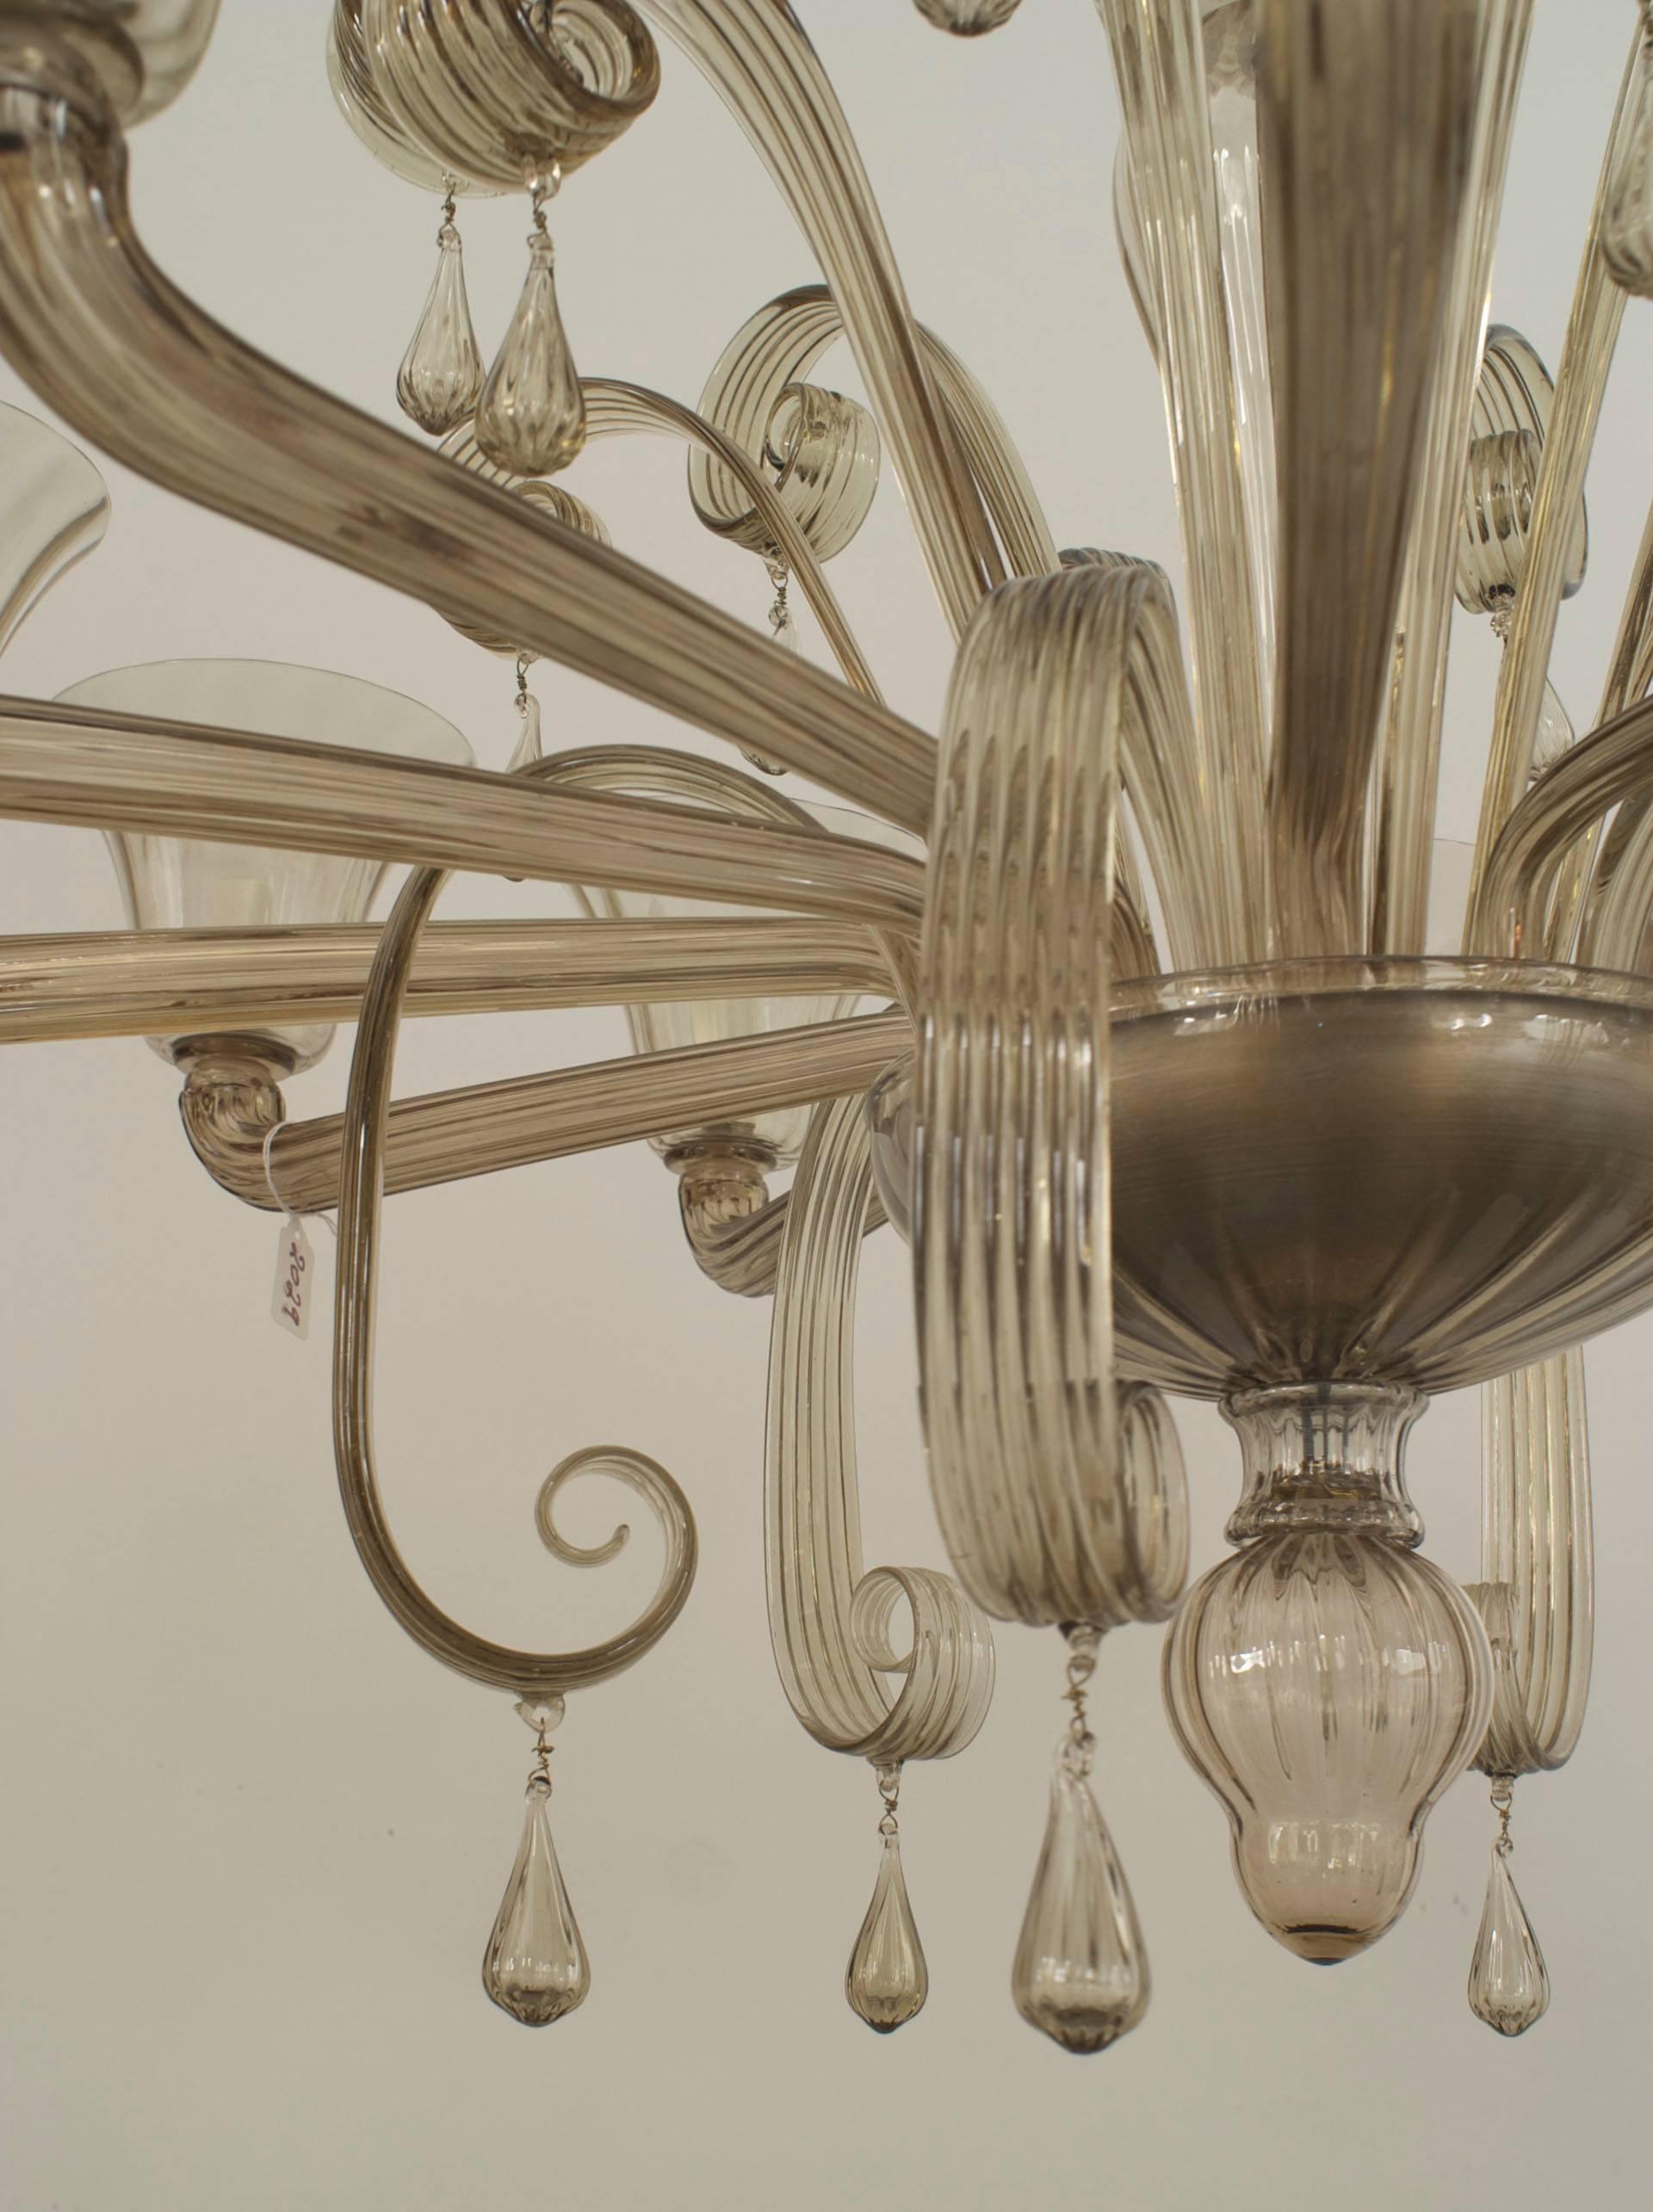 Italian Venetian Murano Smoked Glass Chandelier In Good Condition For Sale In New York, NY